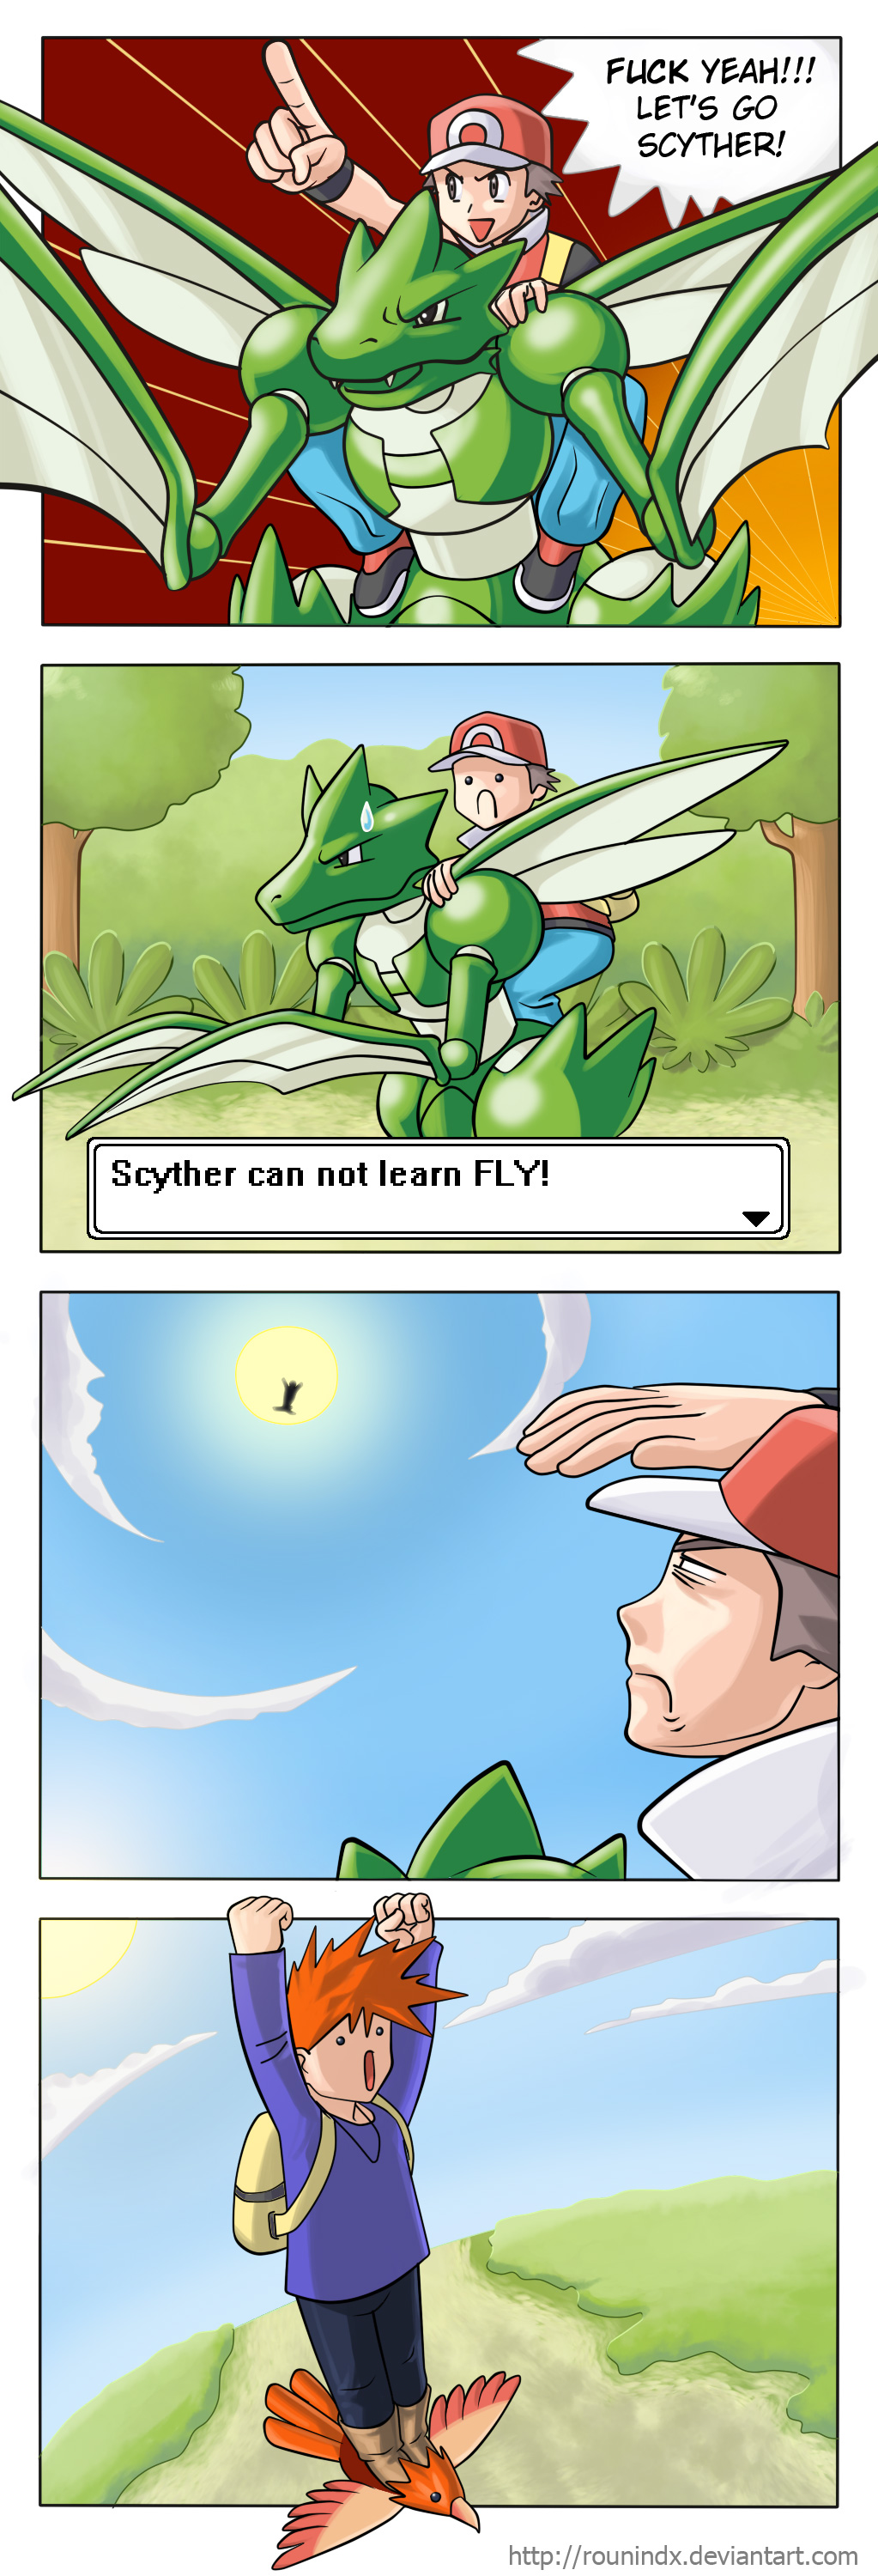 My_tribute___Scyther_can__t_fly_by_rounindx.jpg